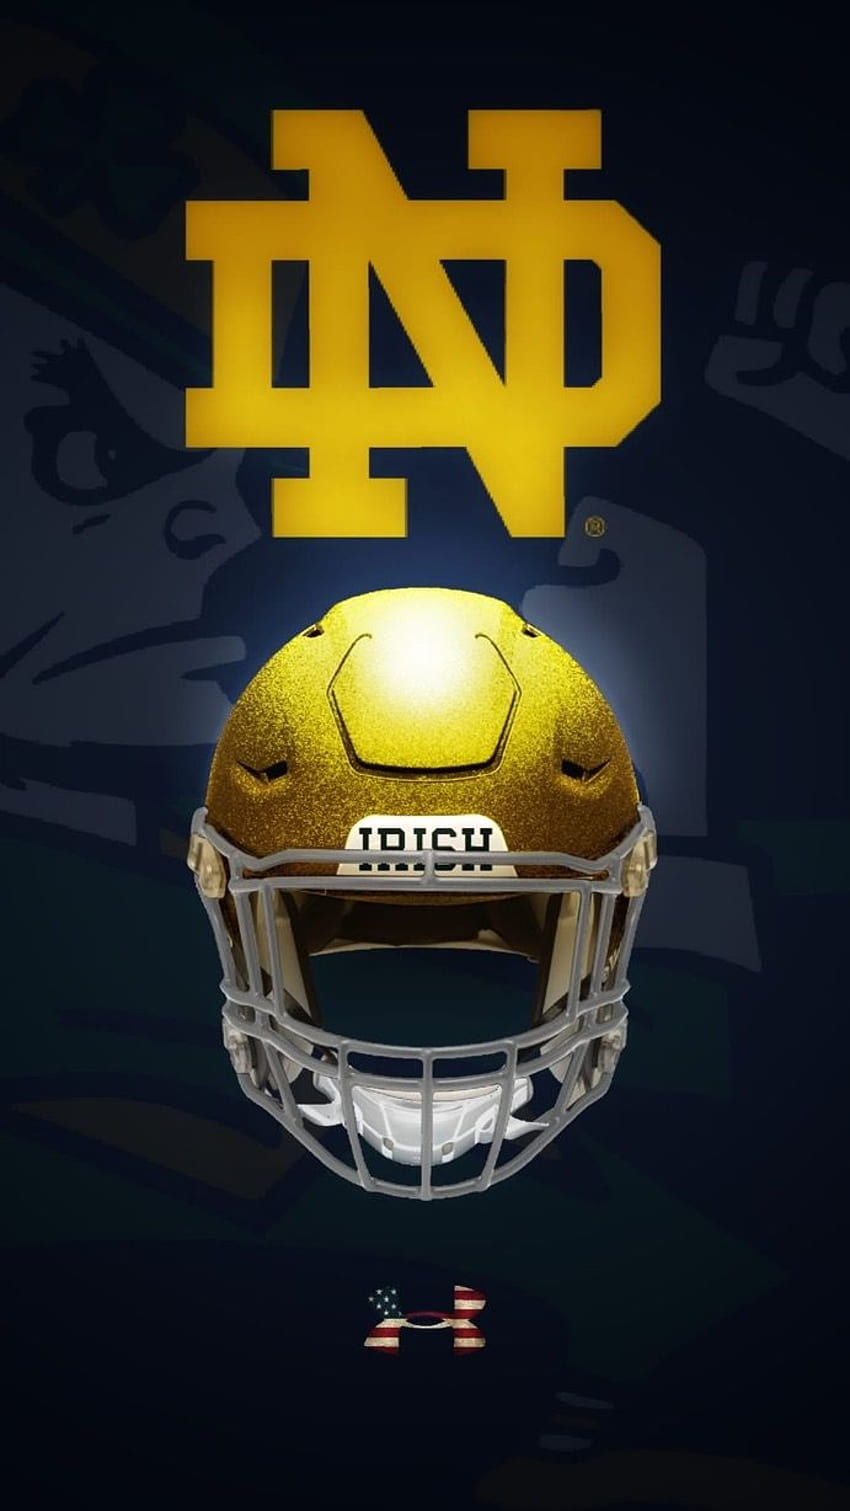 Need a NEW WALLPAPER for your Smartphone Here you GO IRISH GO  Notre  dame football Fighting irish logo Notre dame wallpaper